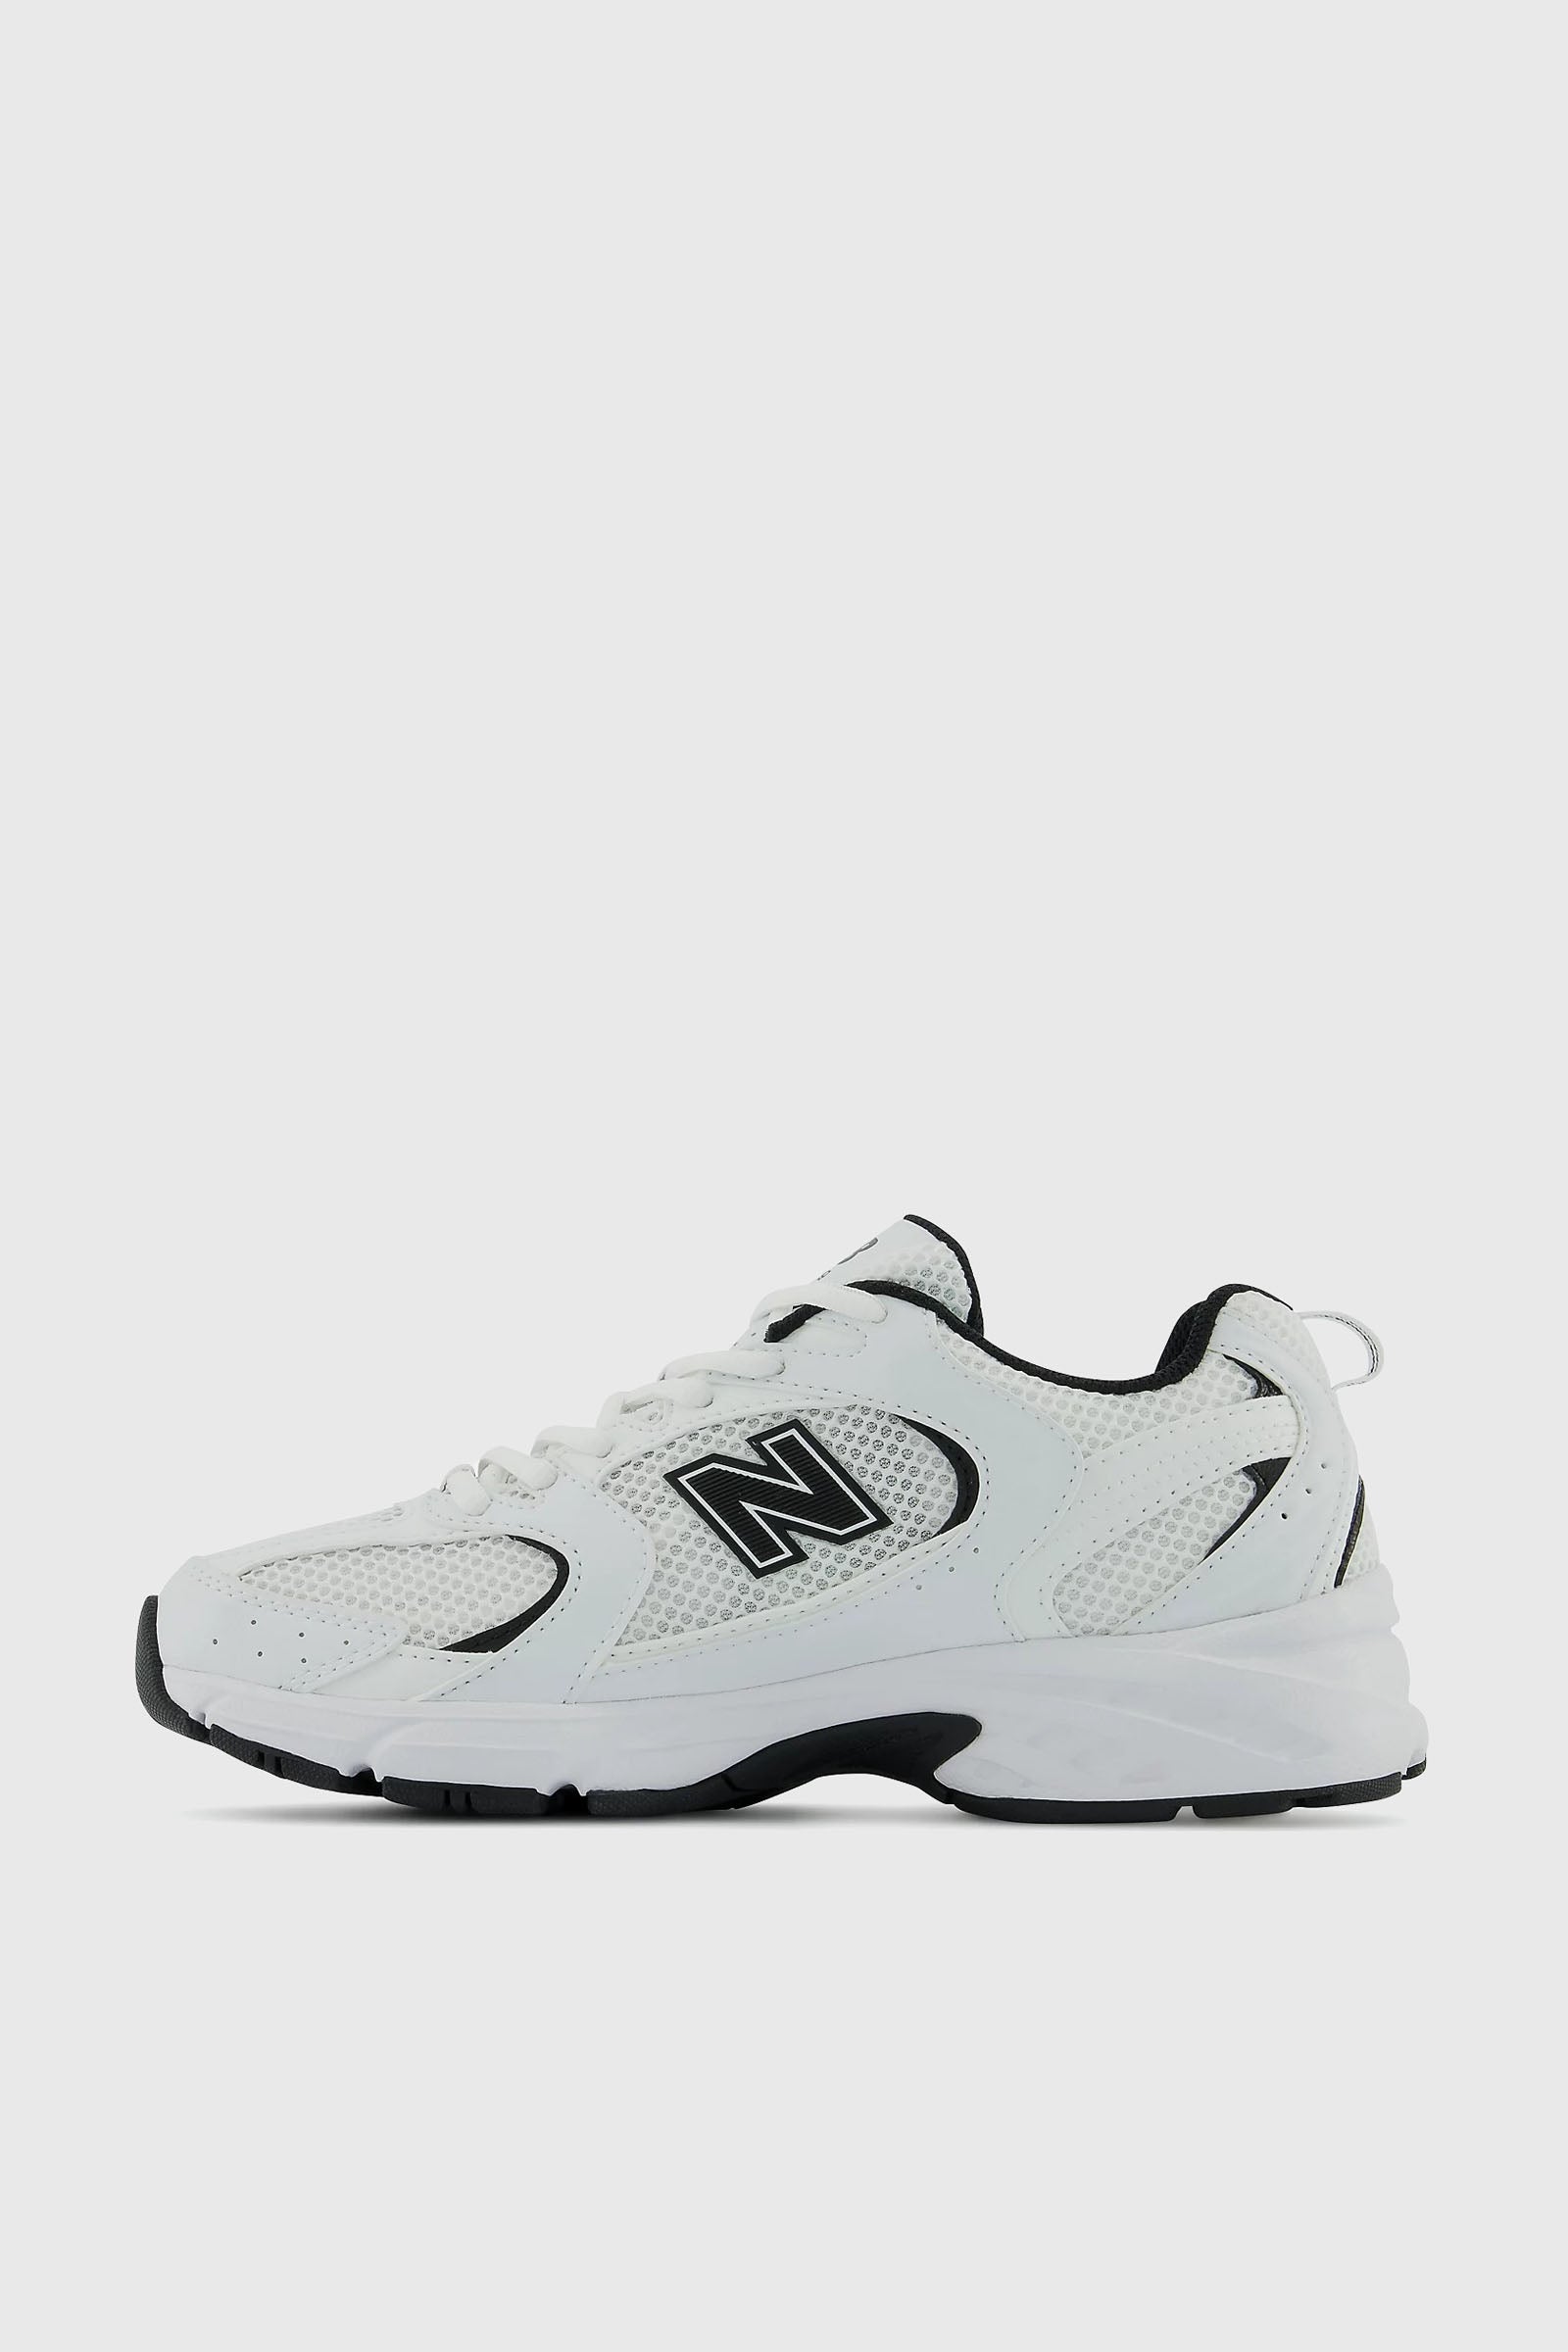 New Balance 530 Synthetic White Sneaker - 5